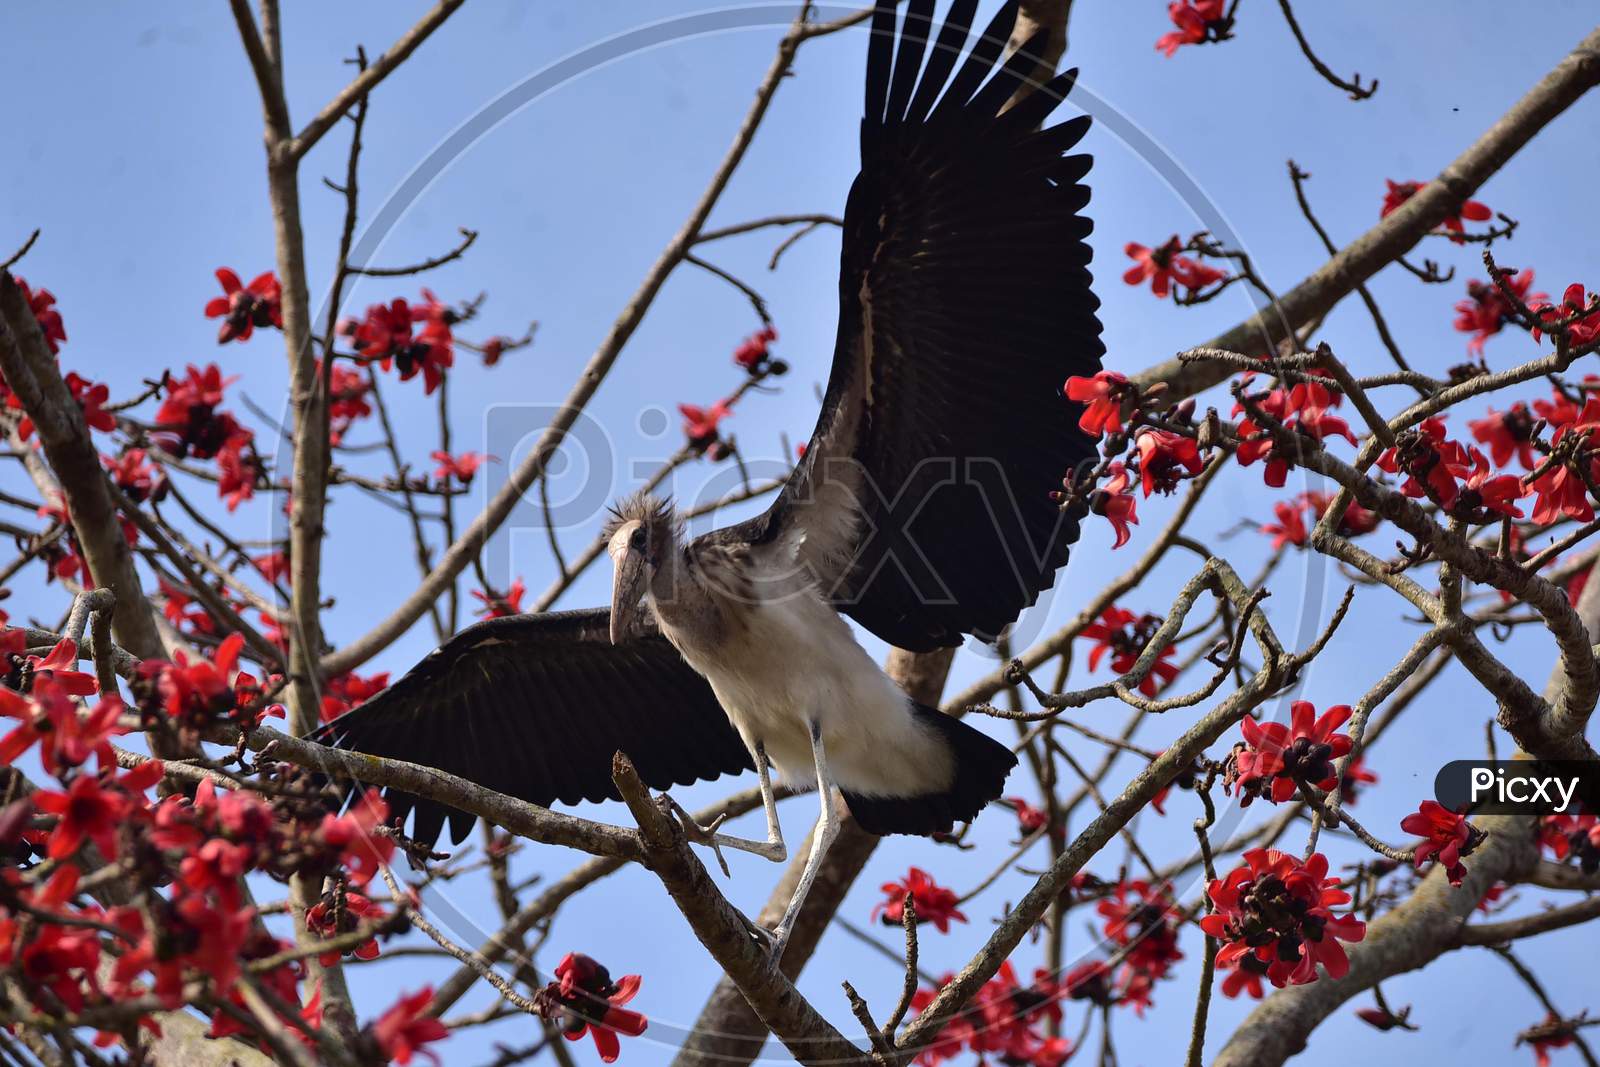 An Adjutant stork, an endangered bird, rests near its nest atop a tree in full bloom in Nagaon District of Assam